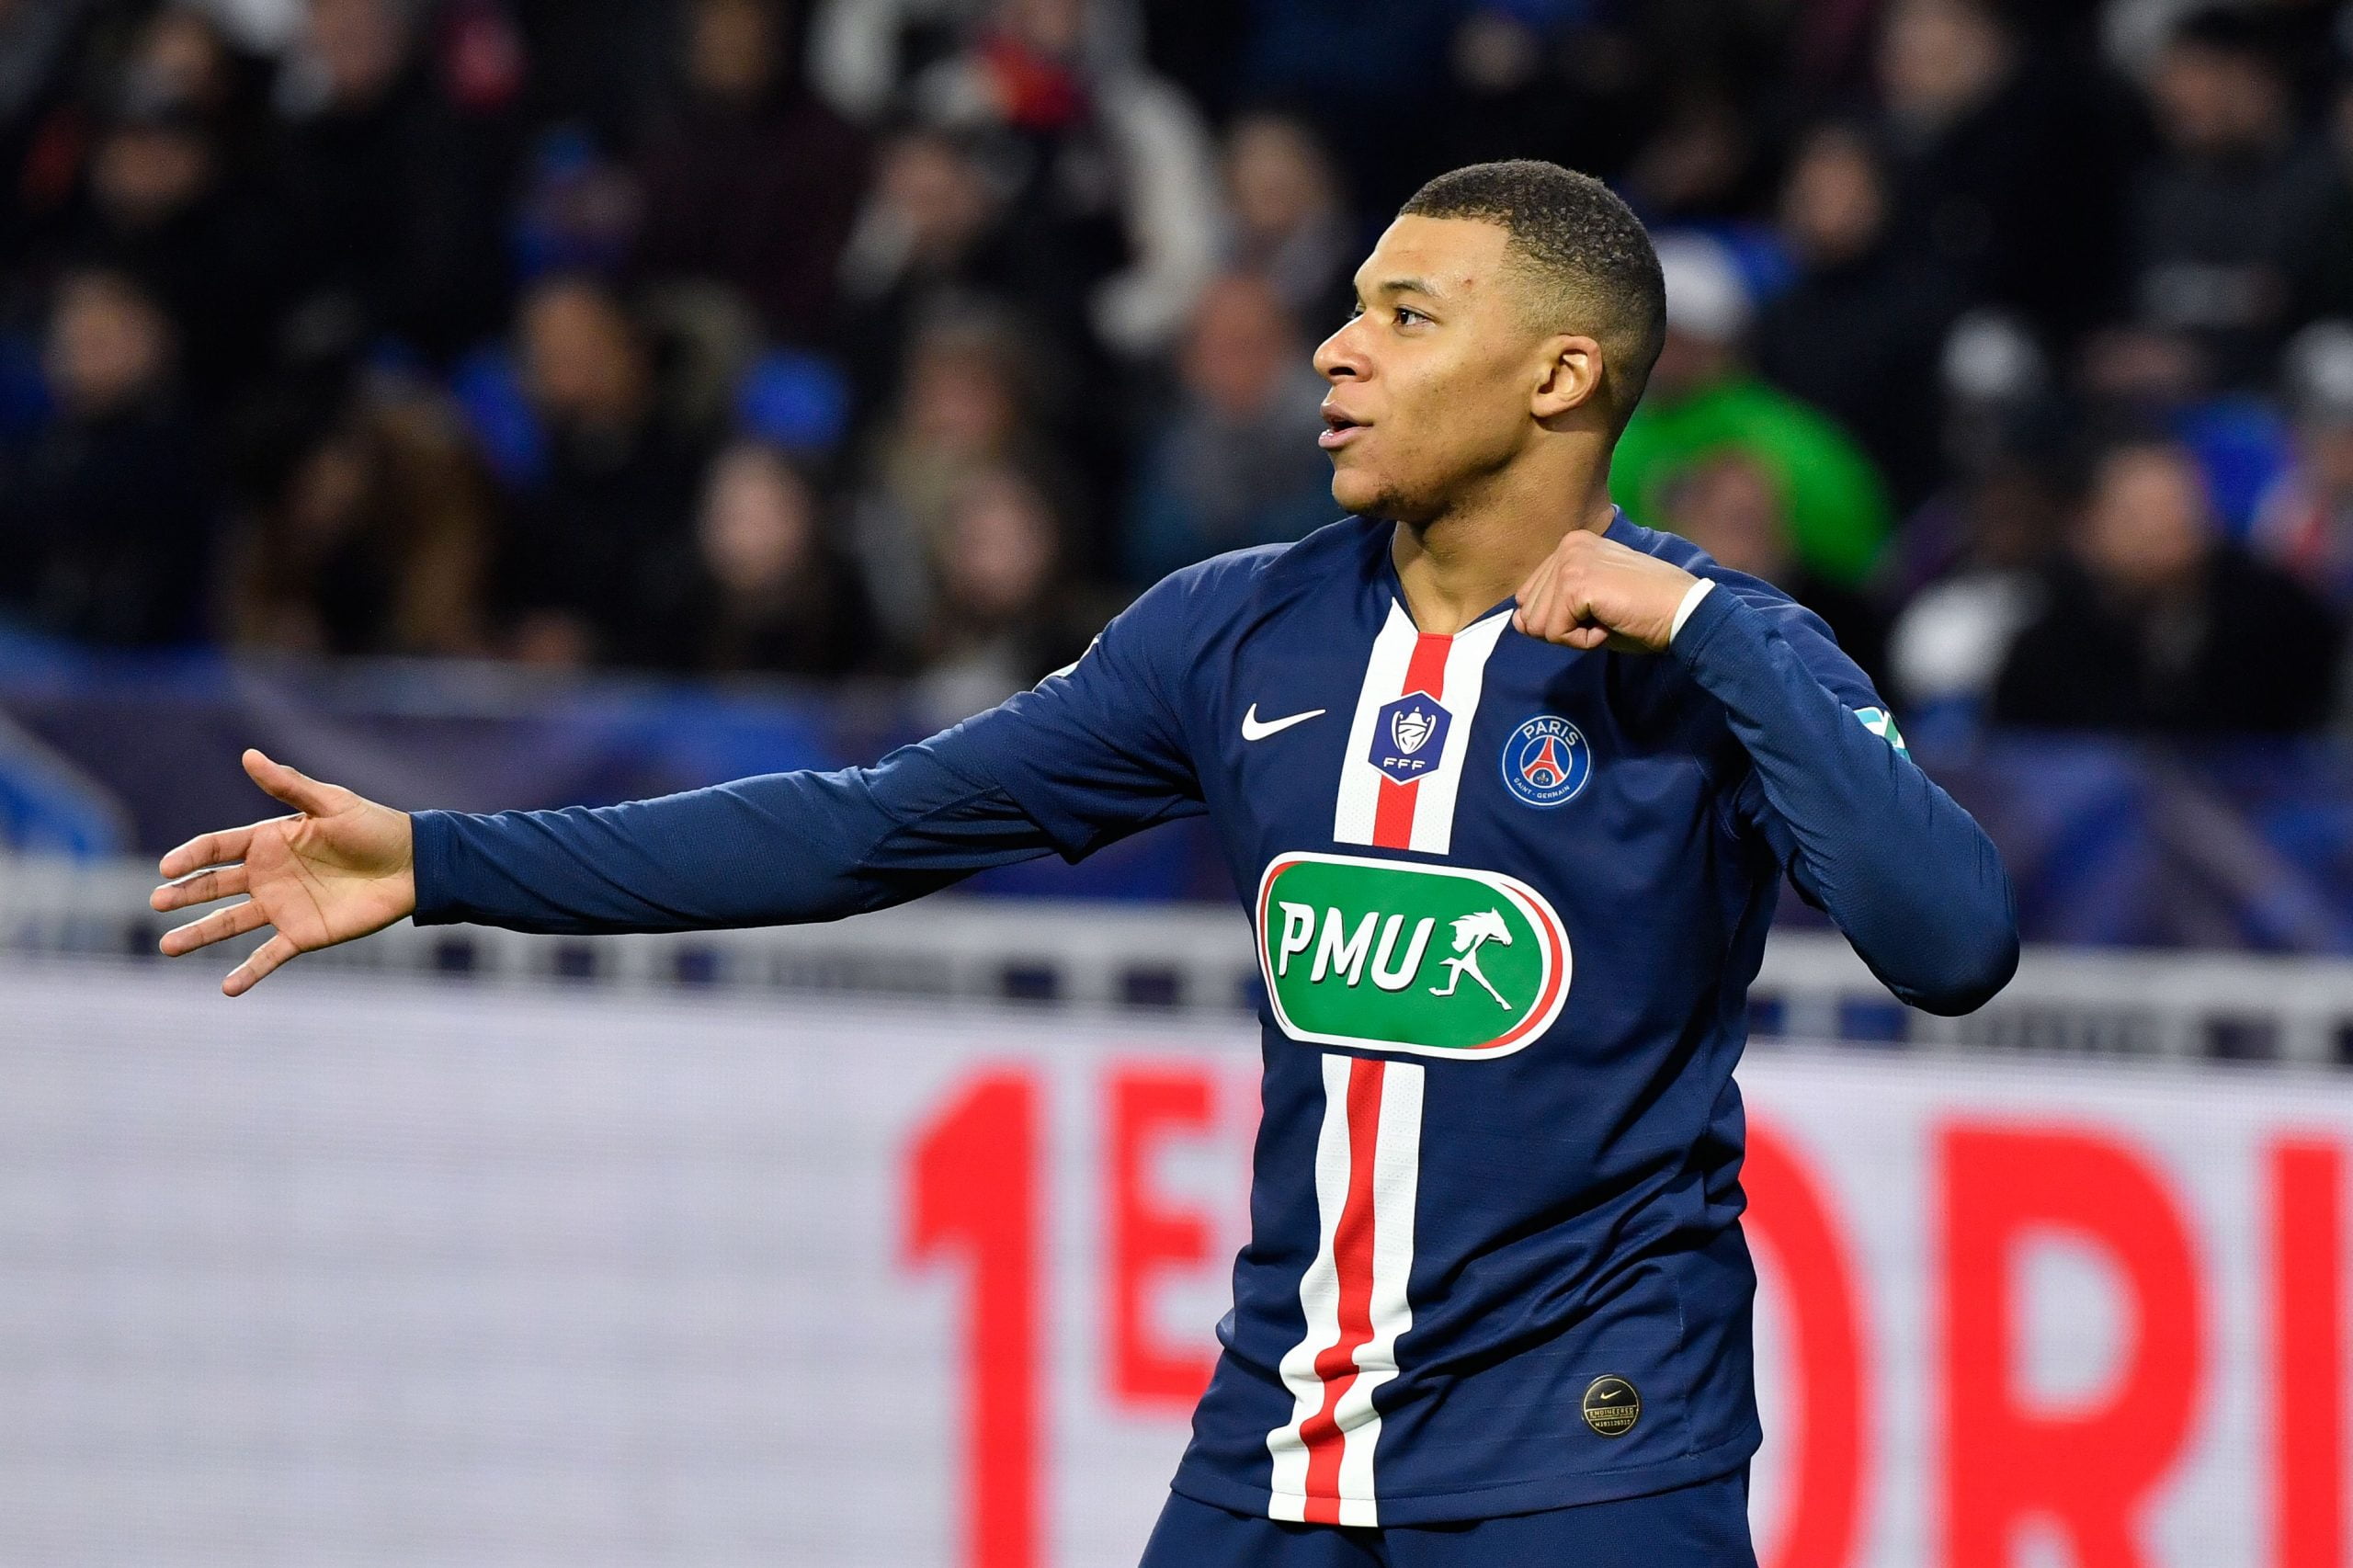 Paris Saint-Germain's French forward Kylian Mbappe celebrates after scoring a goal during the French Cup semi-final football match between Olympique Lyonnais (OL) and Paris Saint-Germain (PSG) at the Groupama Stadium in Decines-Charpieu, centraleastern France, on March 4, 2020. (Photo by Philippe DESMAZES / AFP) (Photo by PHILIPPE DESMAZES/AFP via Getty Images)